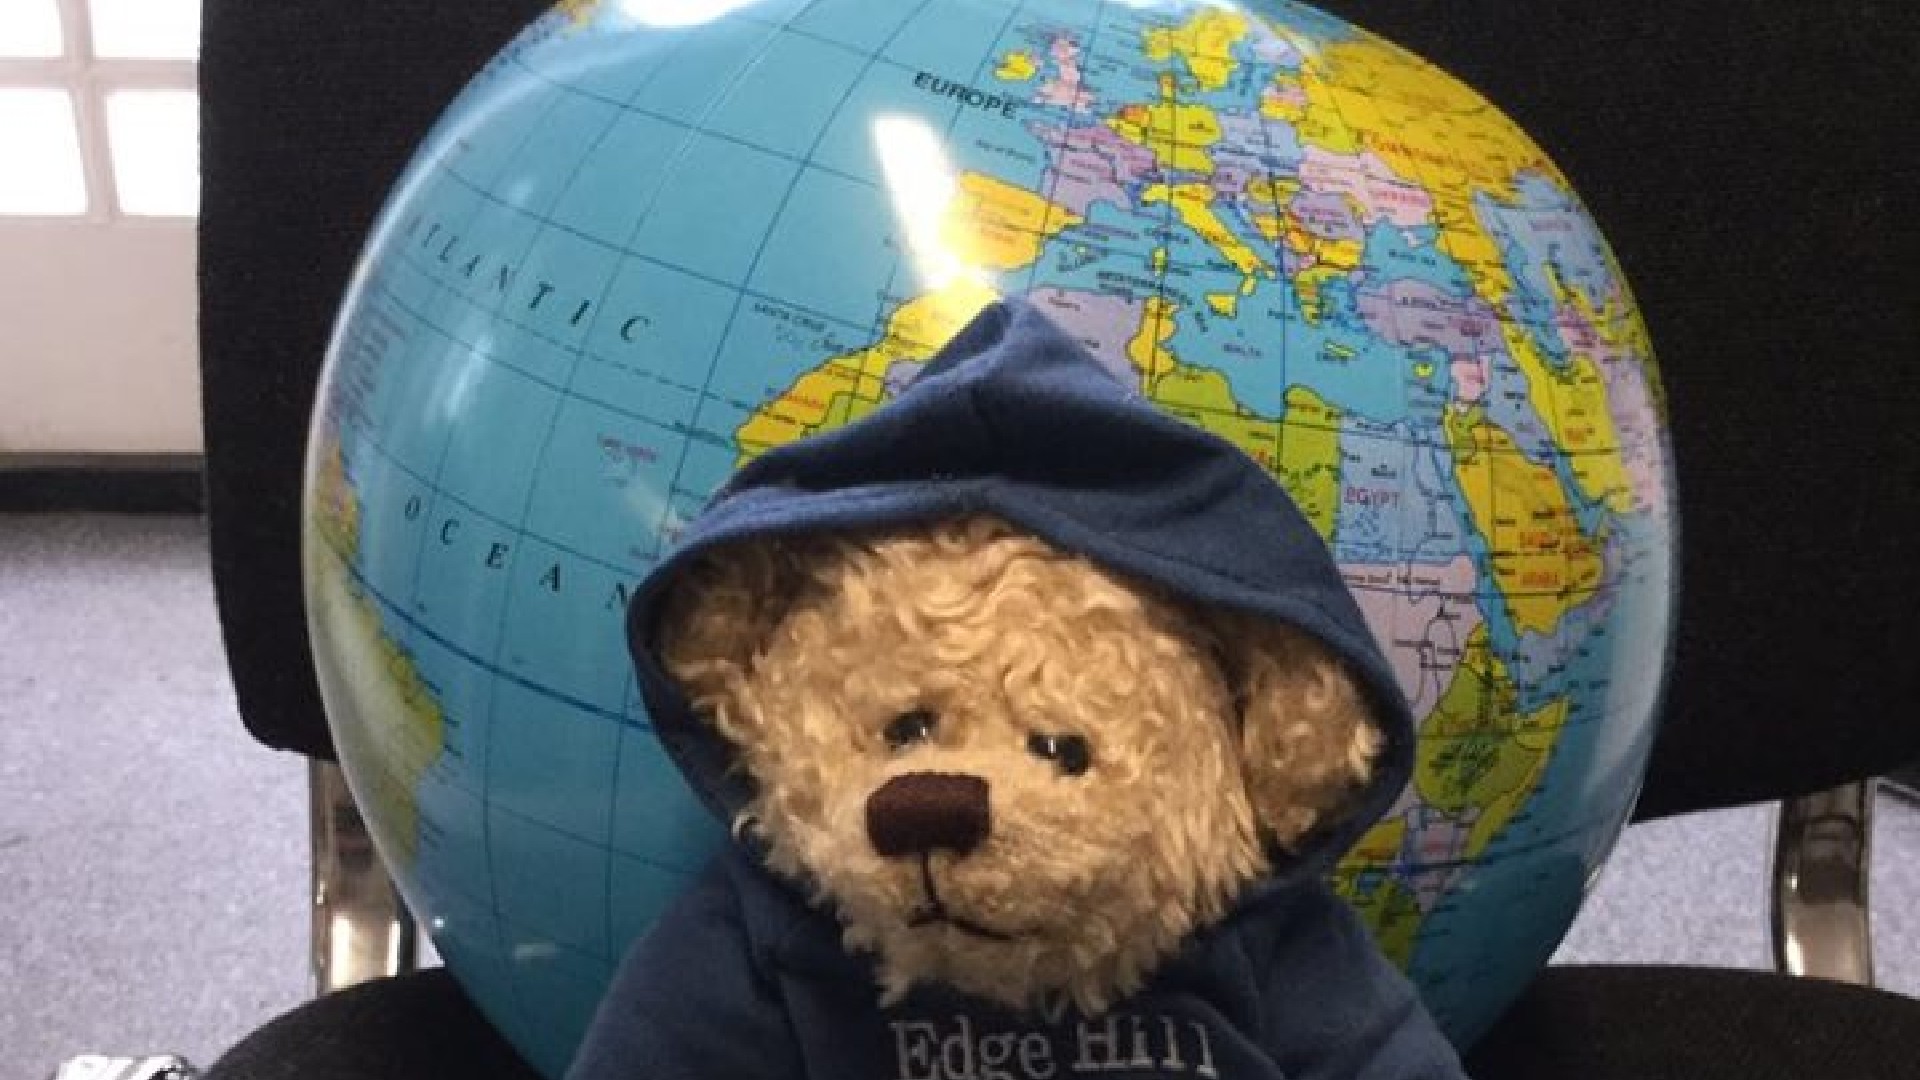 An image of a small brown bear wearing a blue jumper that has white text on that says "Edge Hill University". Behind the bear is a globe. Both the bear and the globe are on top of a black chair. 